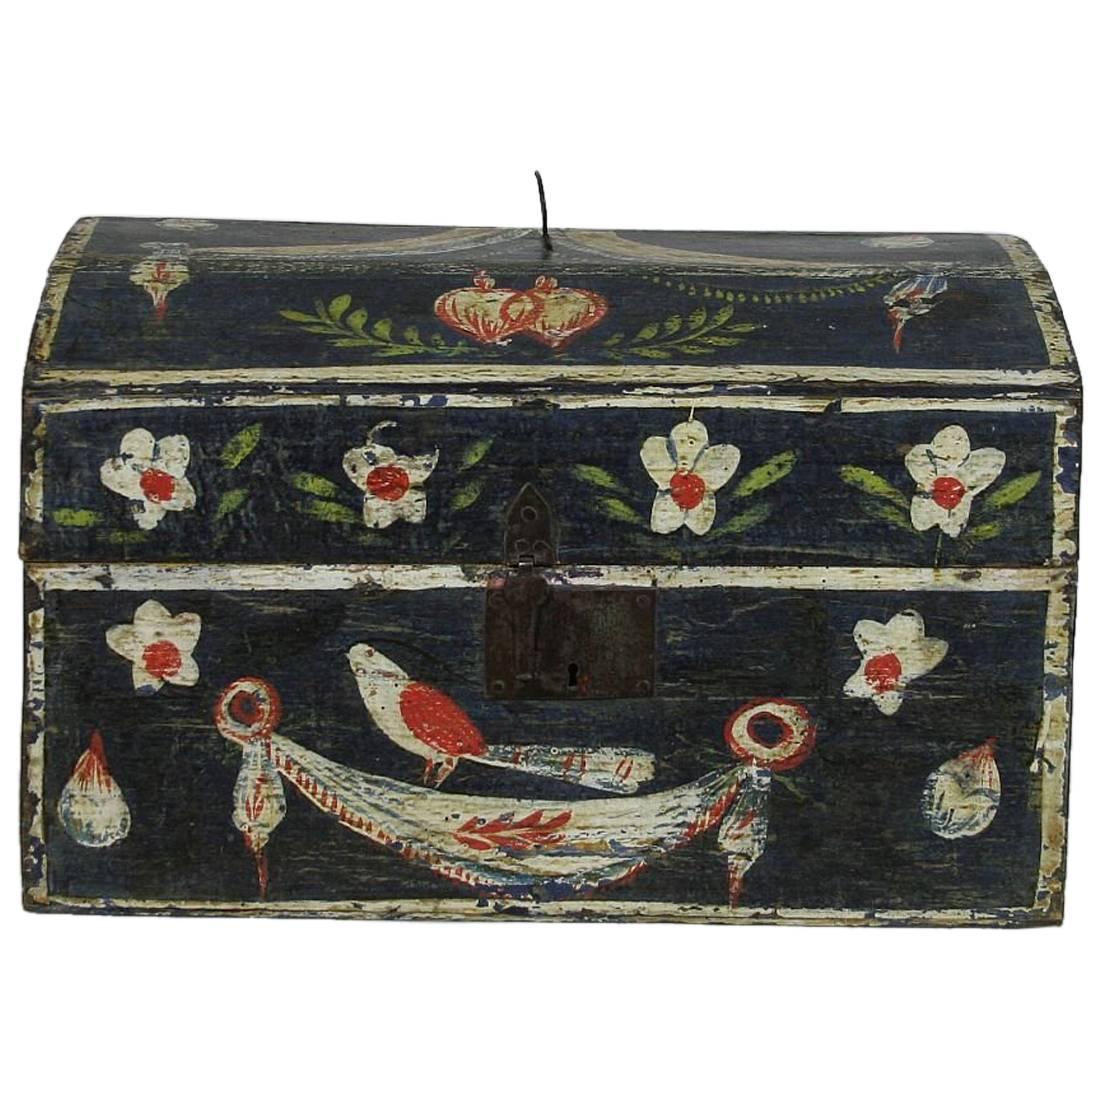 18th Century French Folk Art Weddingbox from Normandy with Hearts and Bird